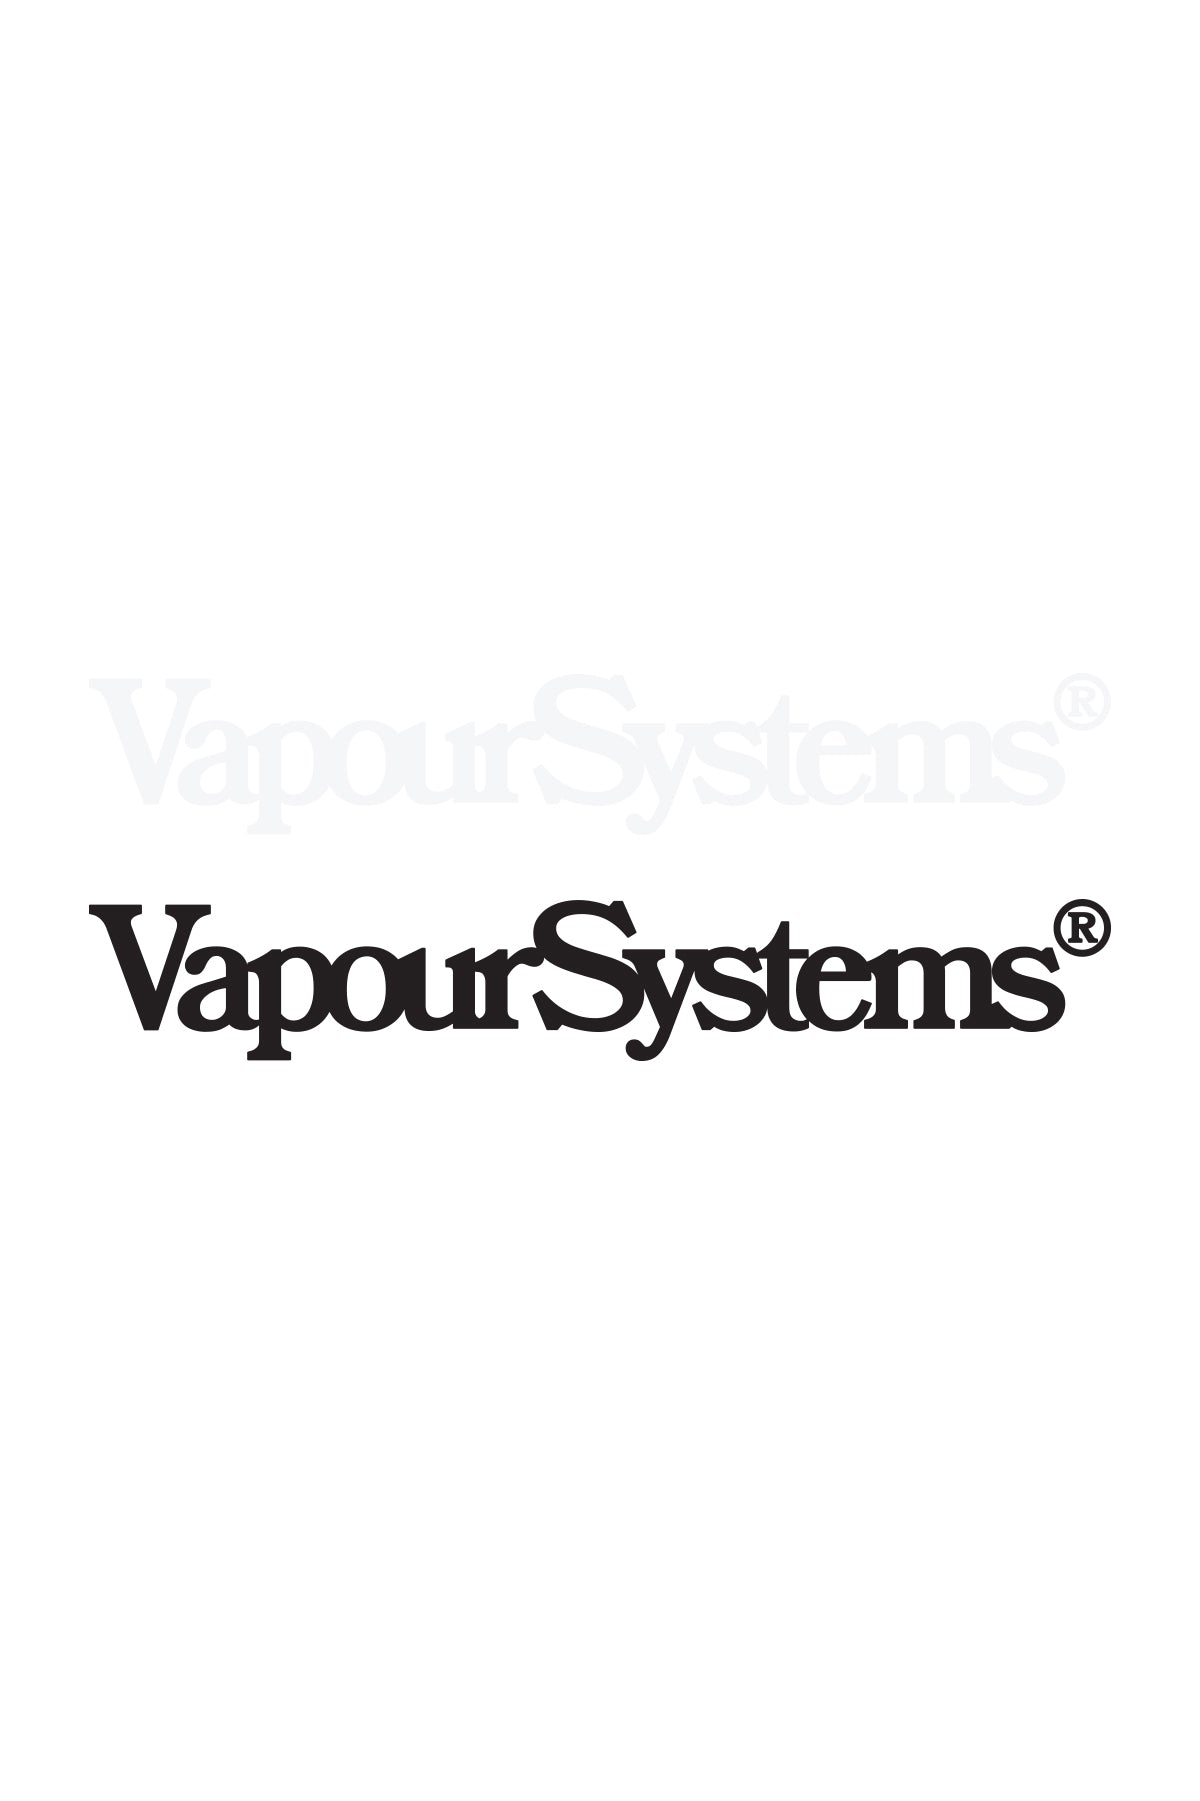 Vapour Systems Logotype Transfer Decal